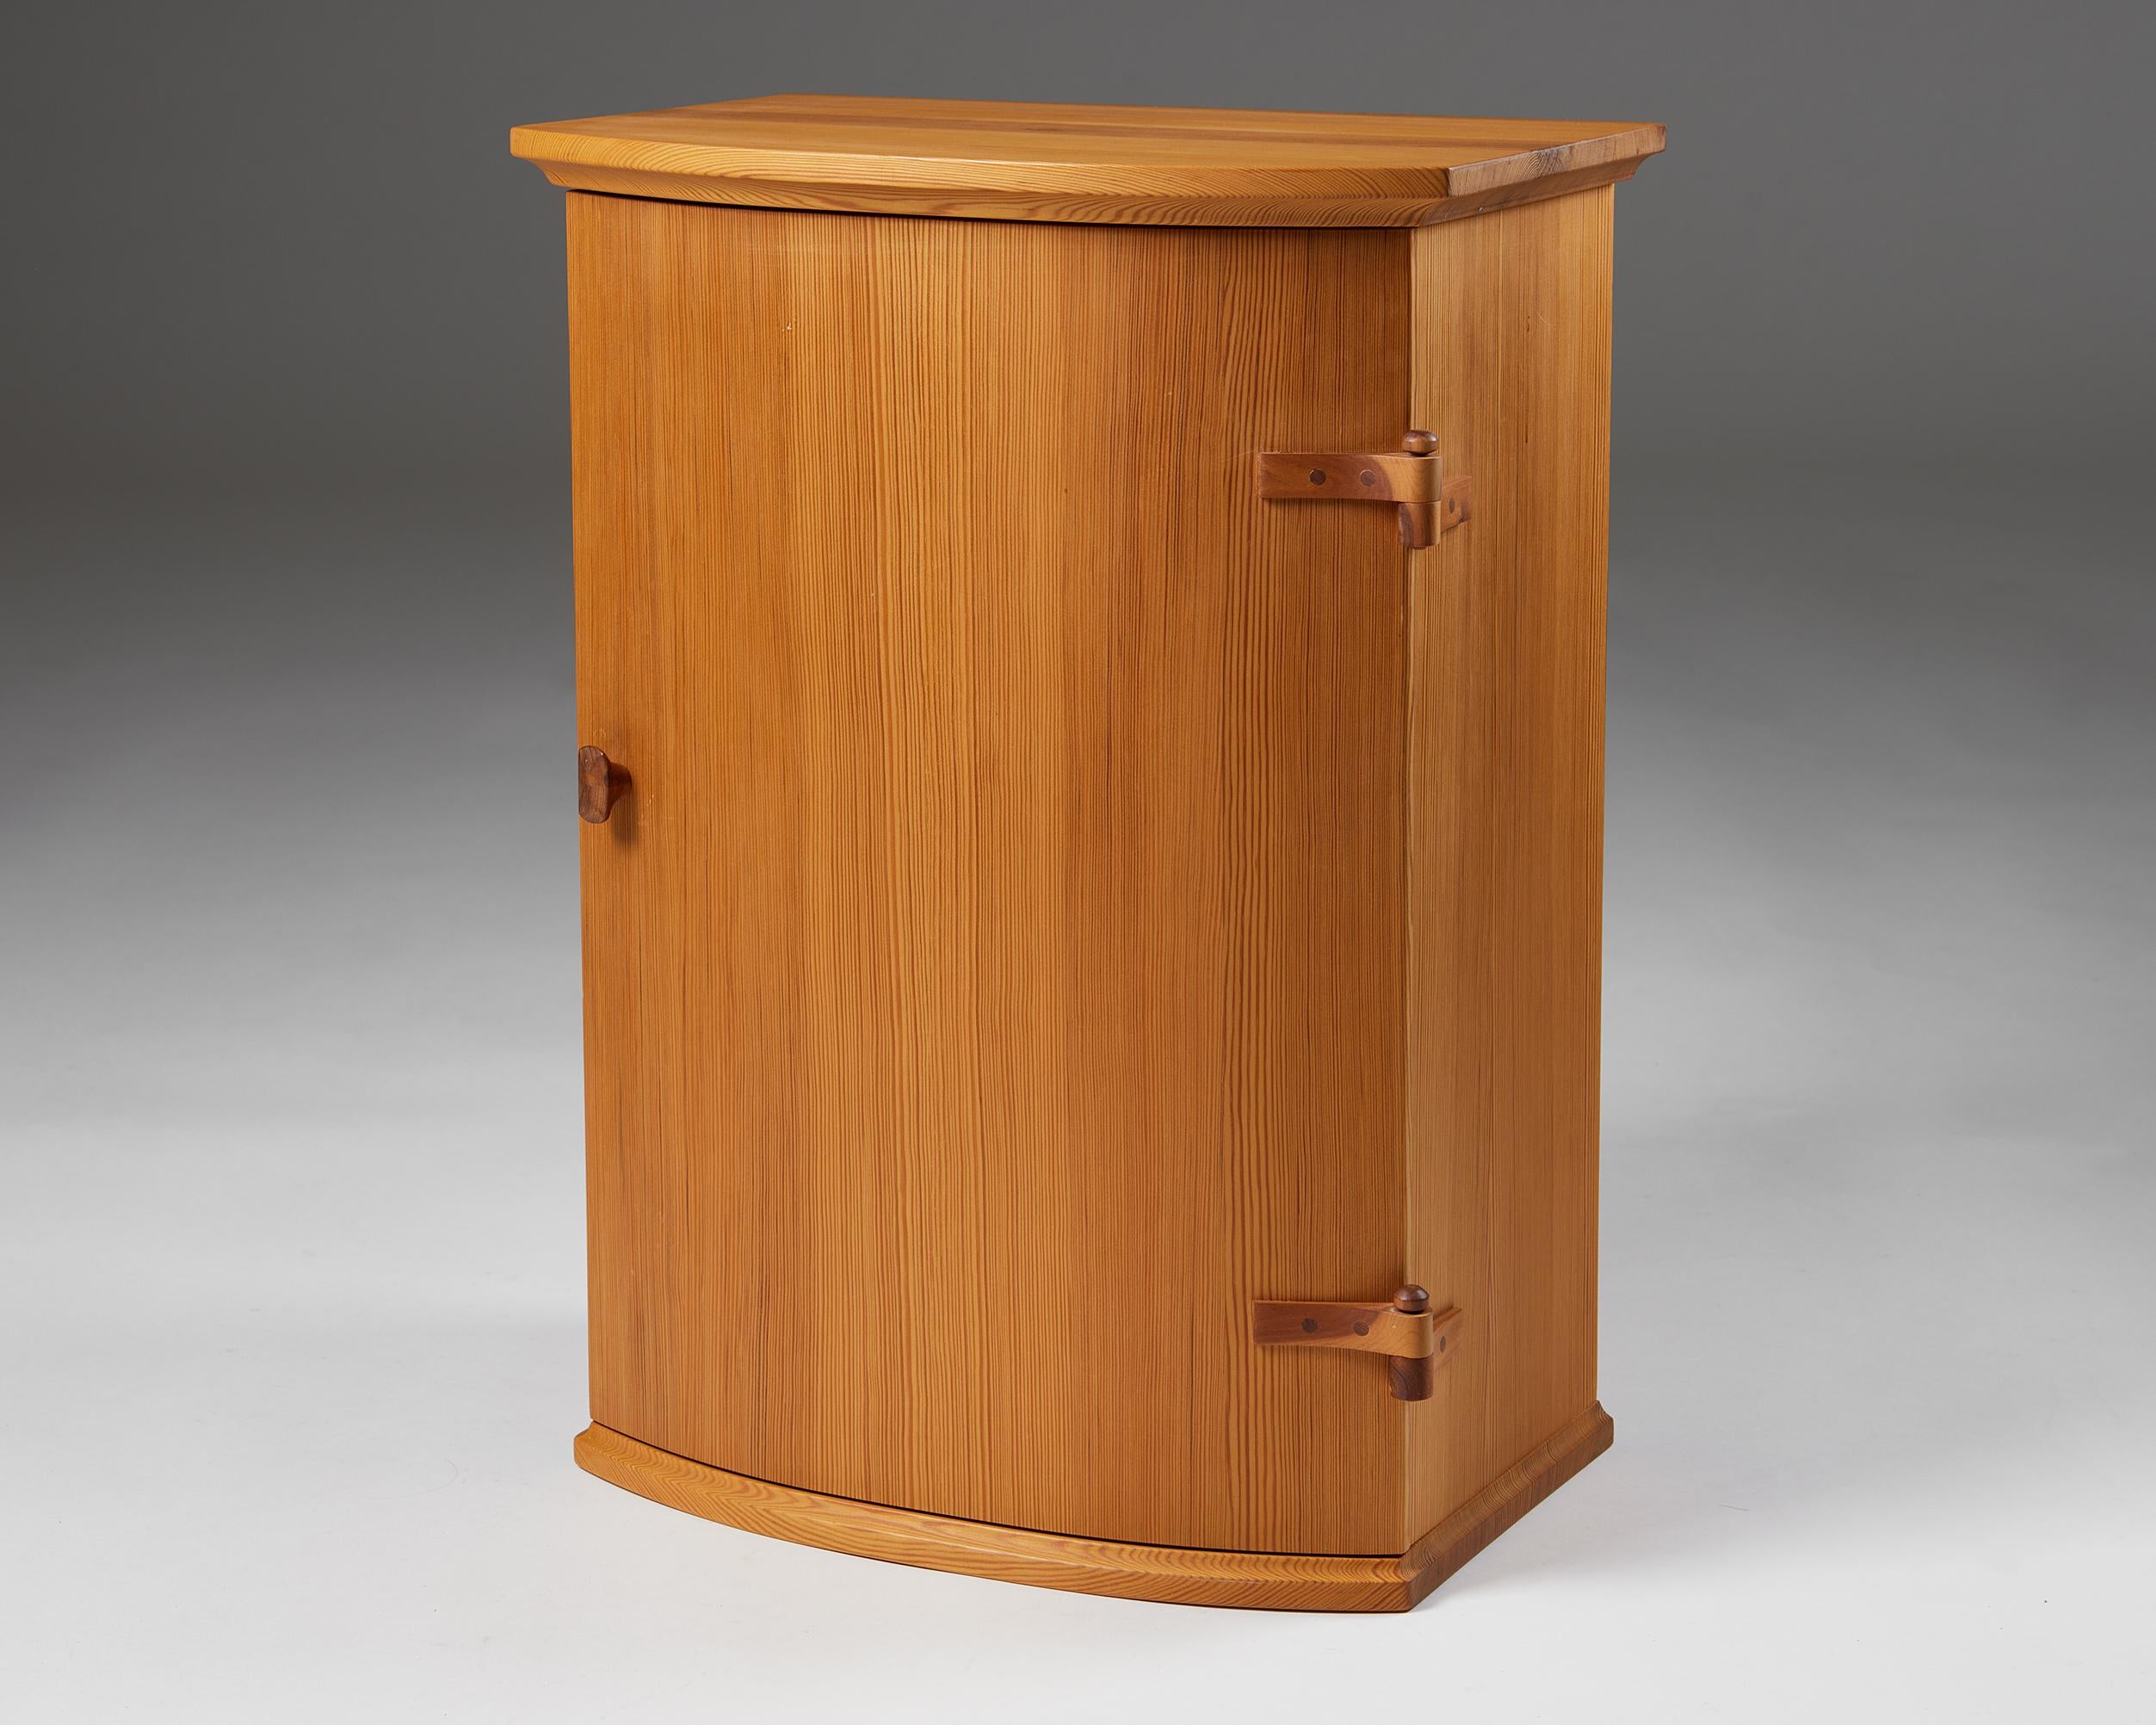 Wall cabinet, anonymous.
Sweden. 1960s.

Pine.

Measures: 
H: 56 cm
W: 41 cm
D: 26 cm
Interior D: 19-23 cm
Height between shelves: 19.5 cm and 22 cm
Drawer height: 7 cm
